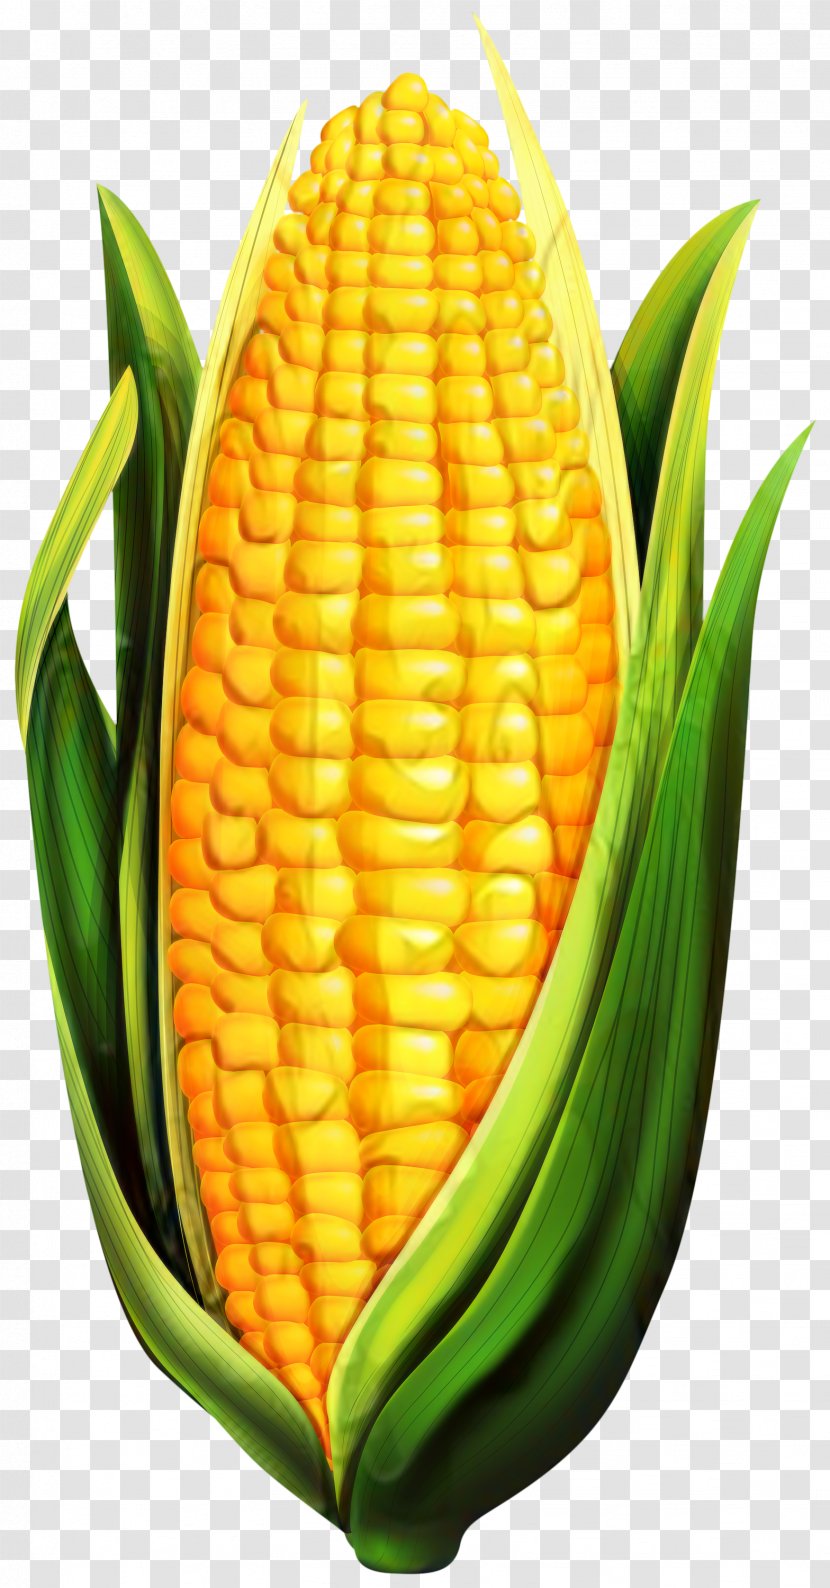 Corn On The Cob Sweet Pineapple Commodity Transparent PNG